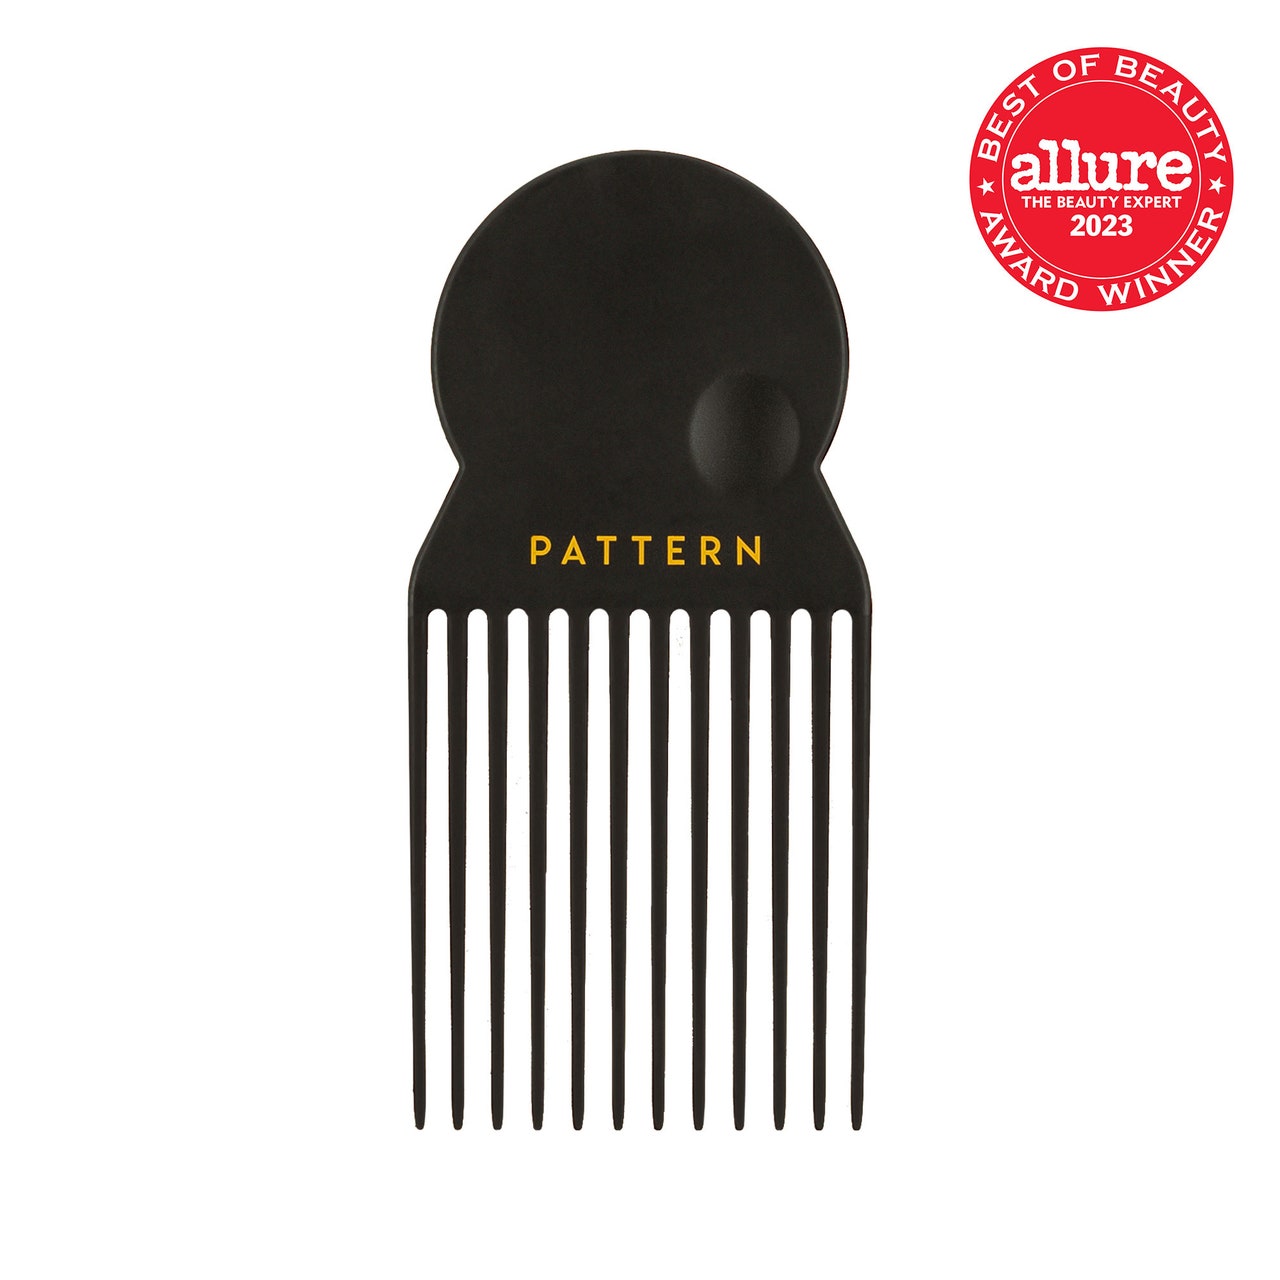 Pattern Beauty Hair Pick black hair pick on white background with red Allure BoB seal in the top right corner